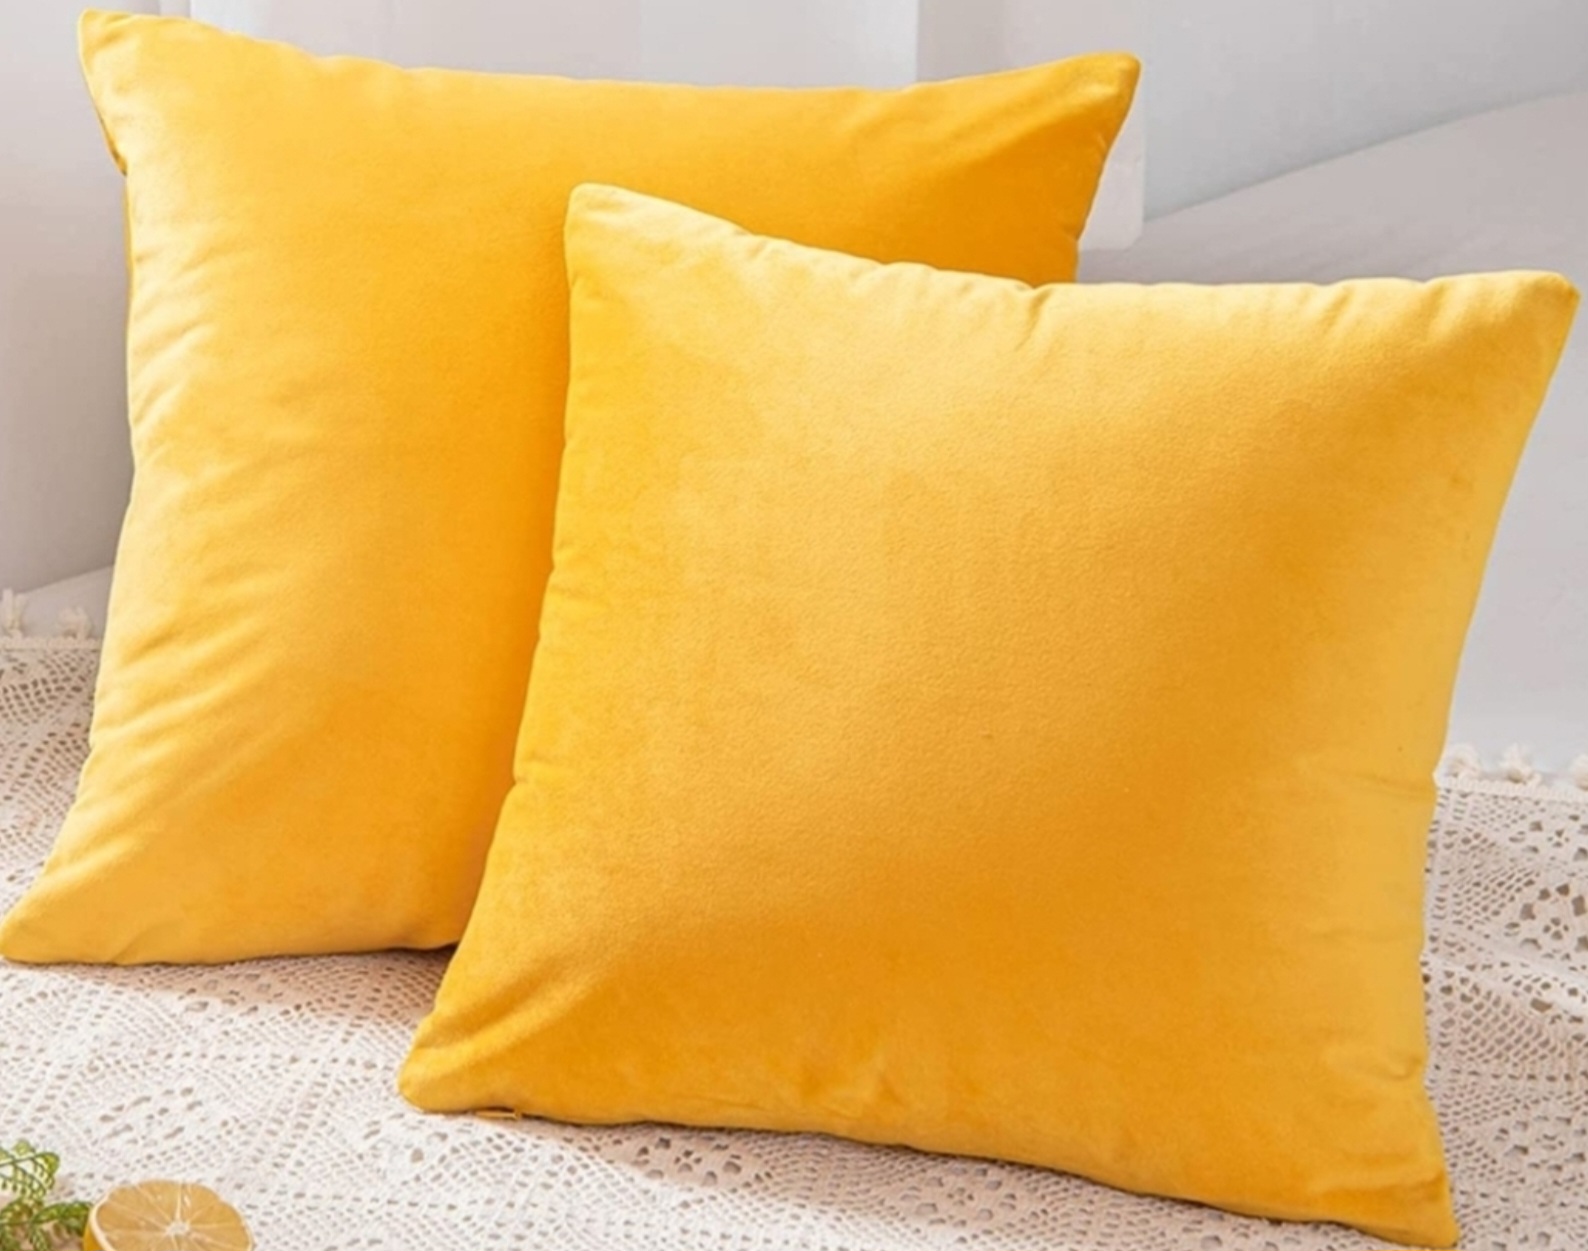 High-quality Indoor/Outdoor Velvet Cushion Covers by Bakumon: Available in 2 or 4 Packs.